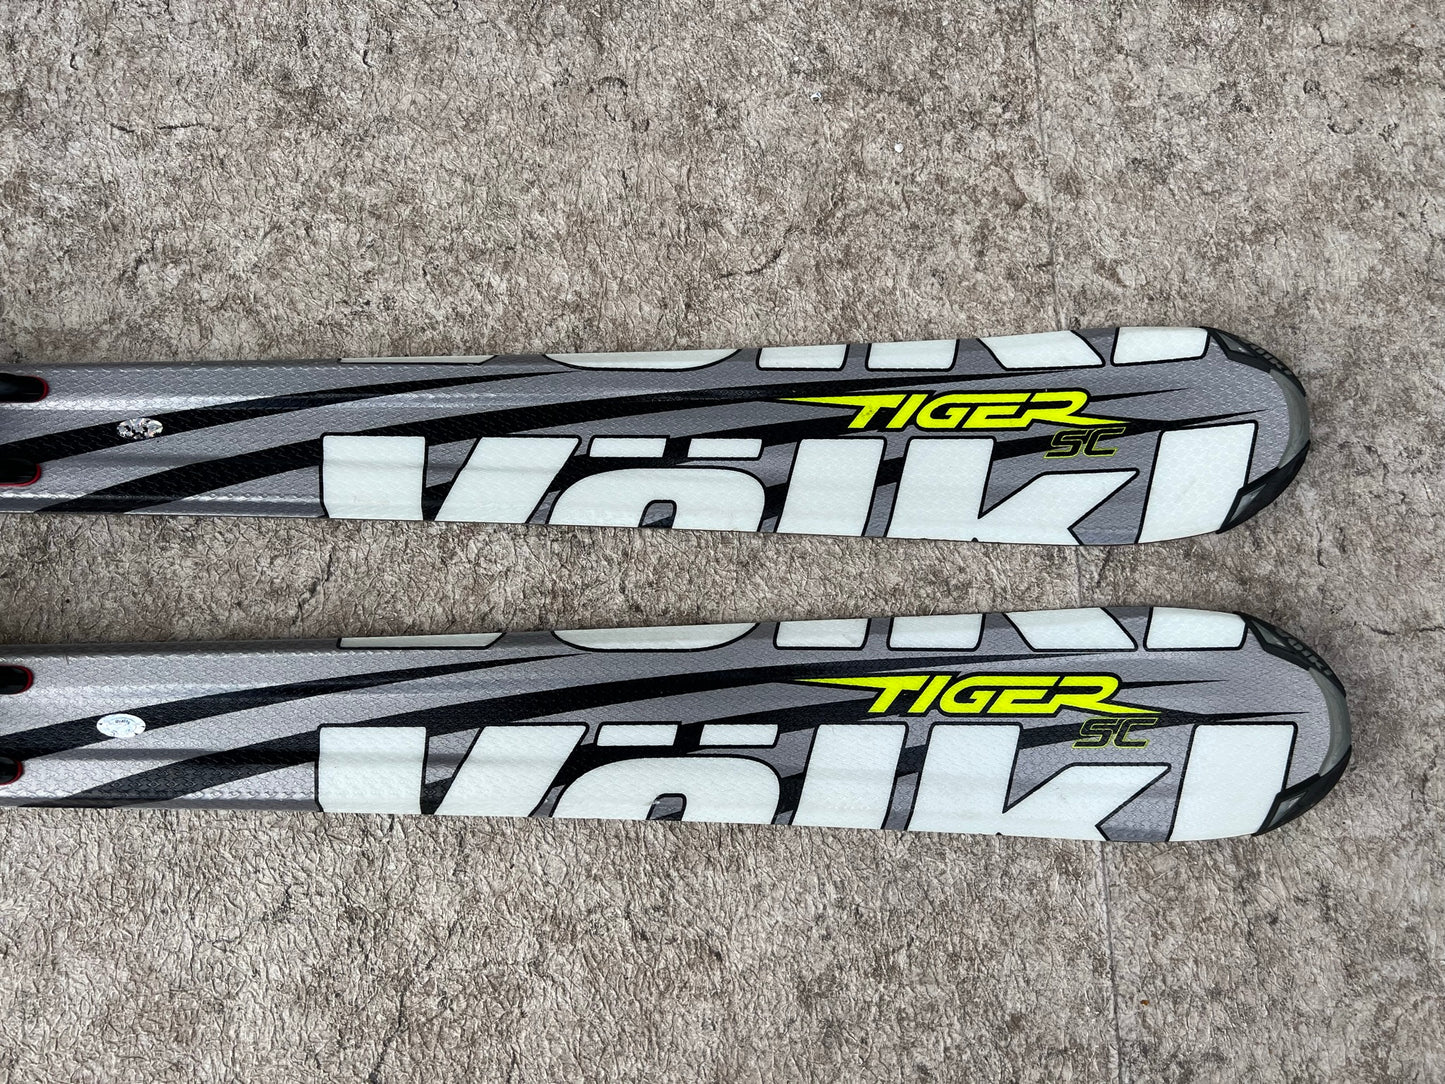 Ski 148 Volki Tiger Grey Lime Parabolic With Bindings Excellent